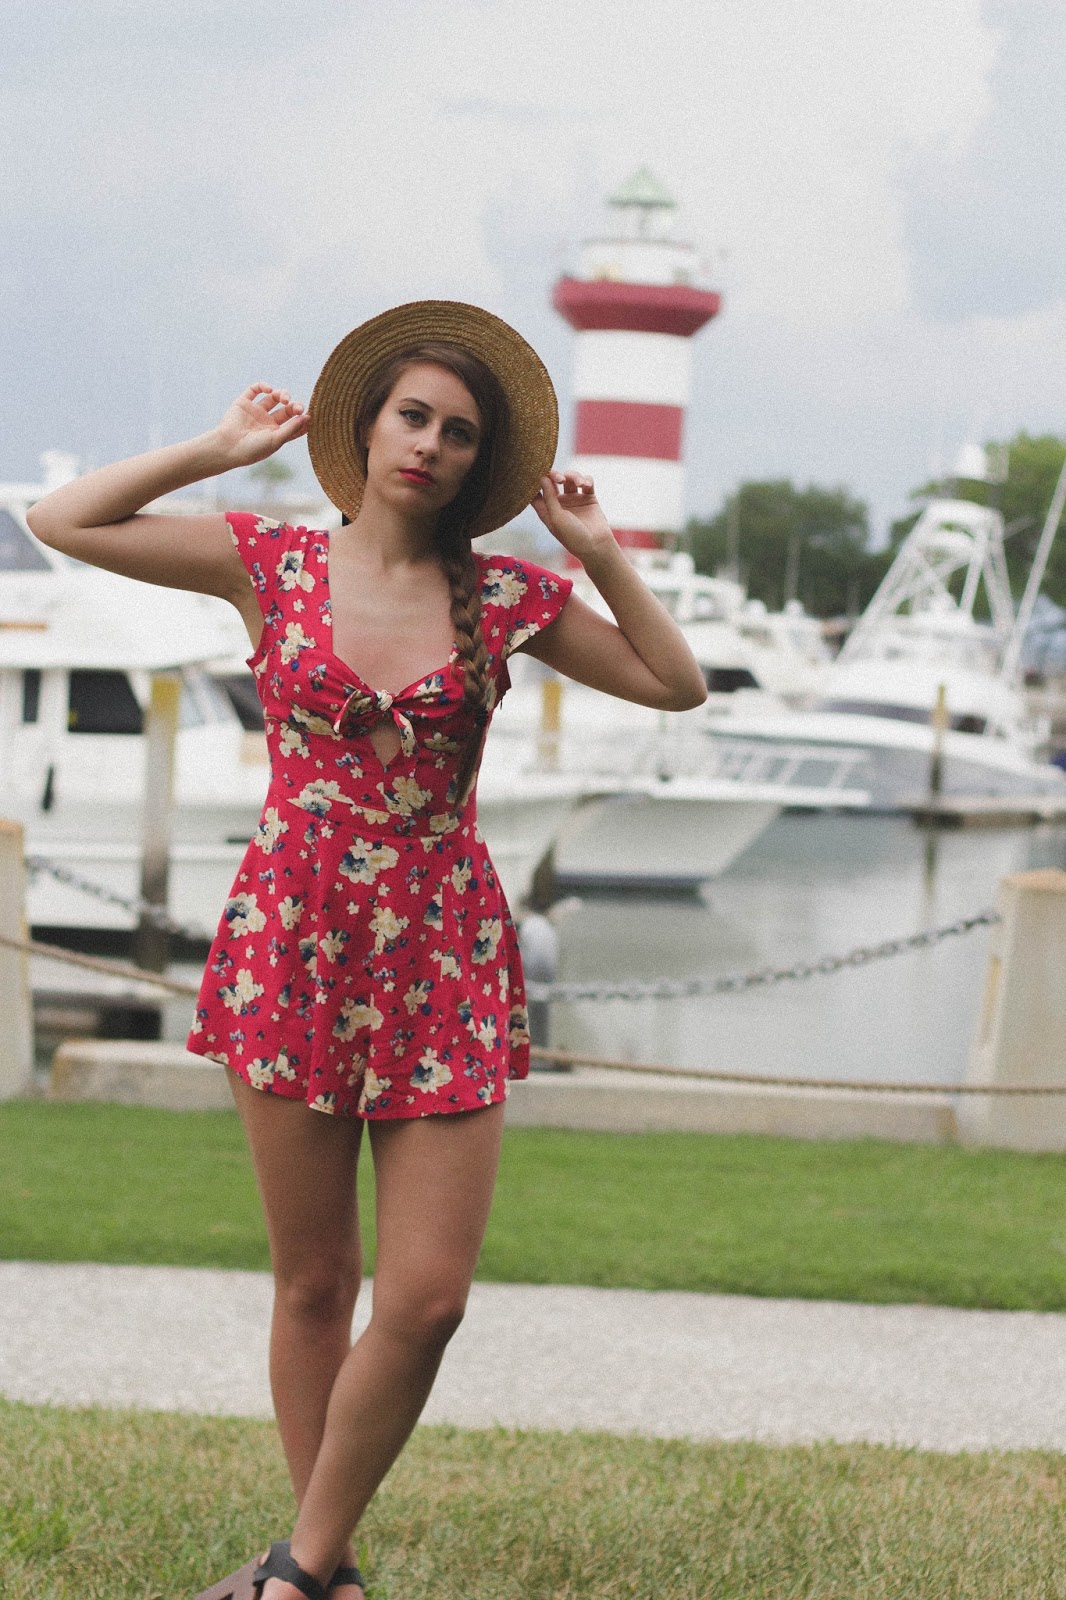 Vintage, retro, style, vintage style, retro style, romper, floral, boater hat, taylor swift style, summer outfit, beach outfit, beachwear retro, forever 21, classic, fashion, personal style blogger, fashion blogger, movie blogger, film blogger, girly, 